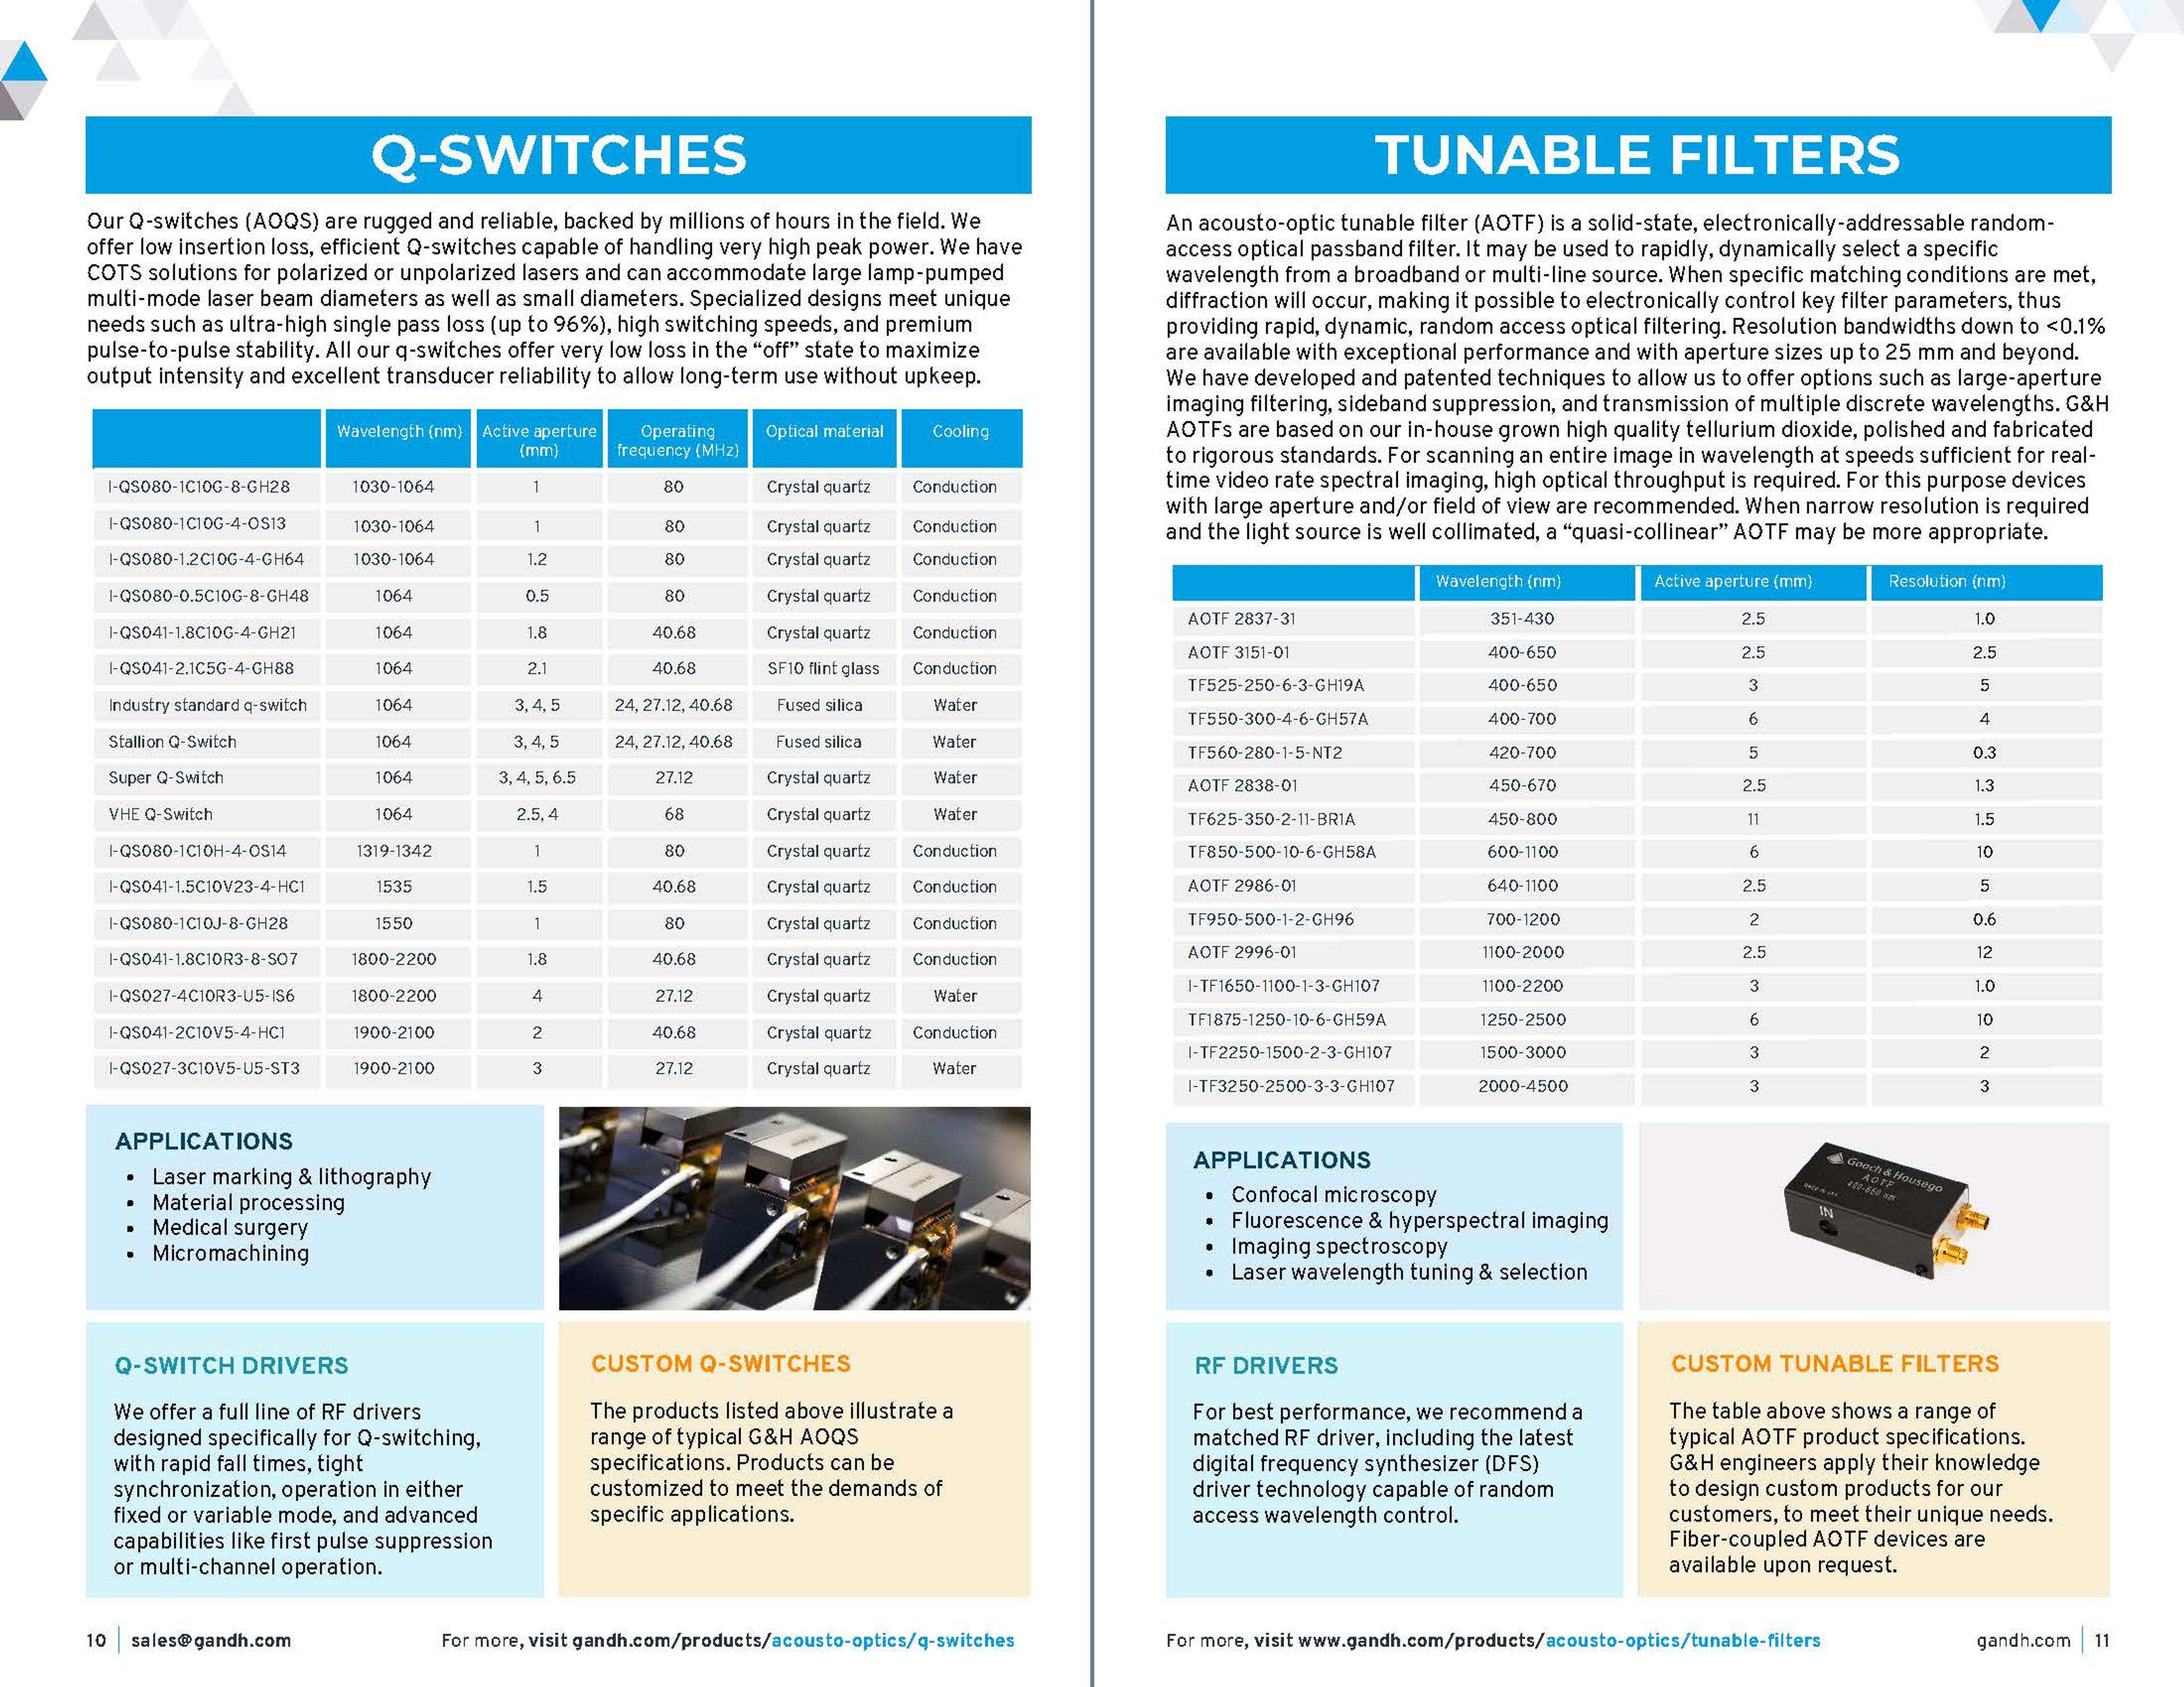 G&H Product & Solutions Guide - Acousto-Optics Page 10-11